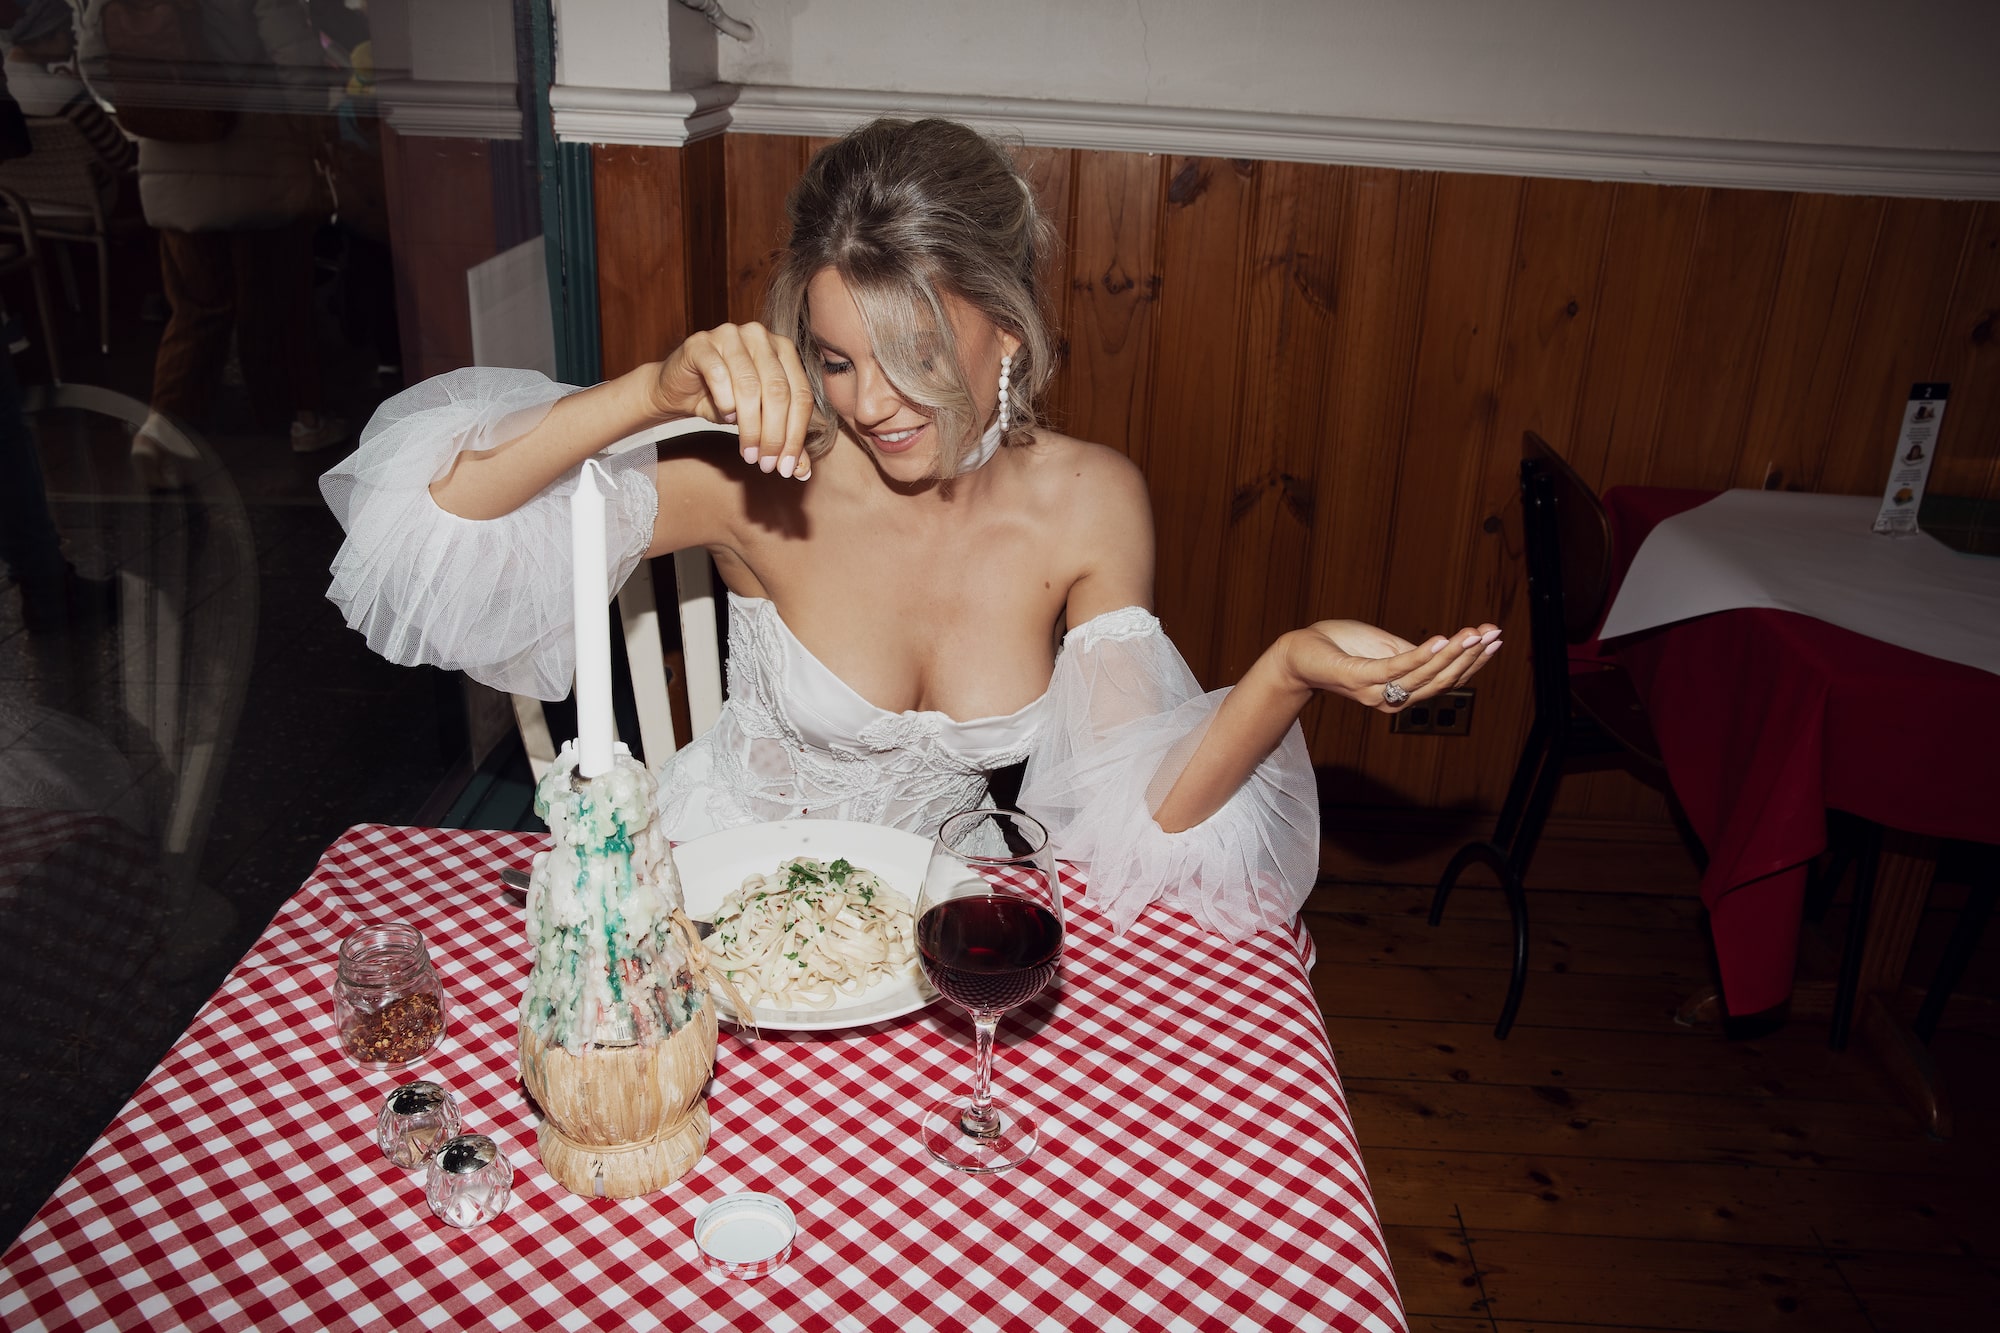 Model posing sprinkling salt onto pasta seated at a table in an italian cafe